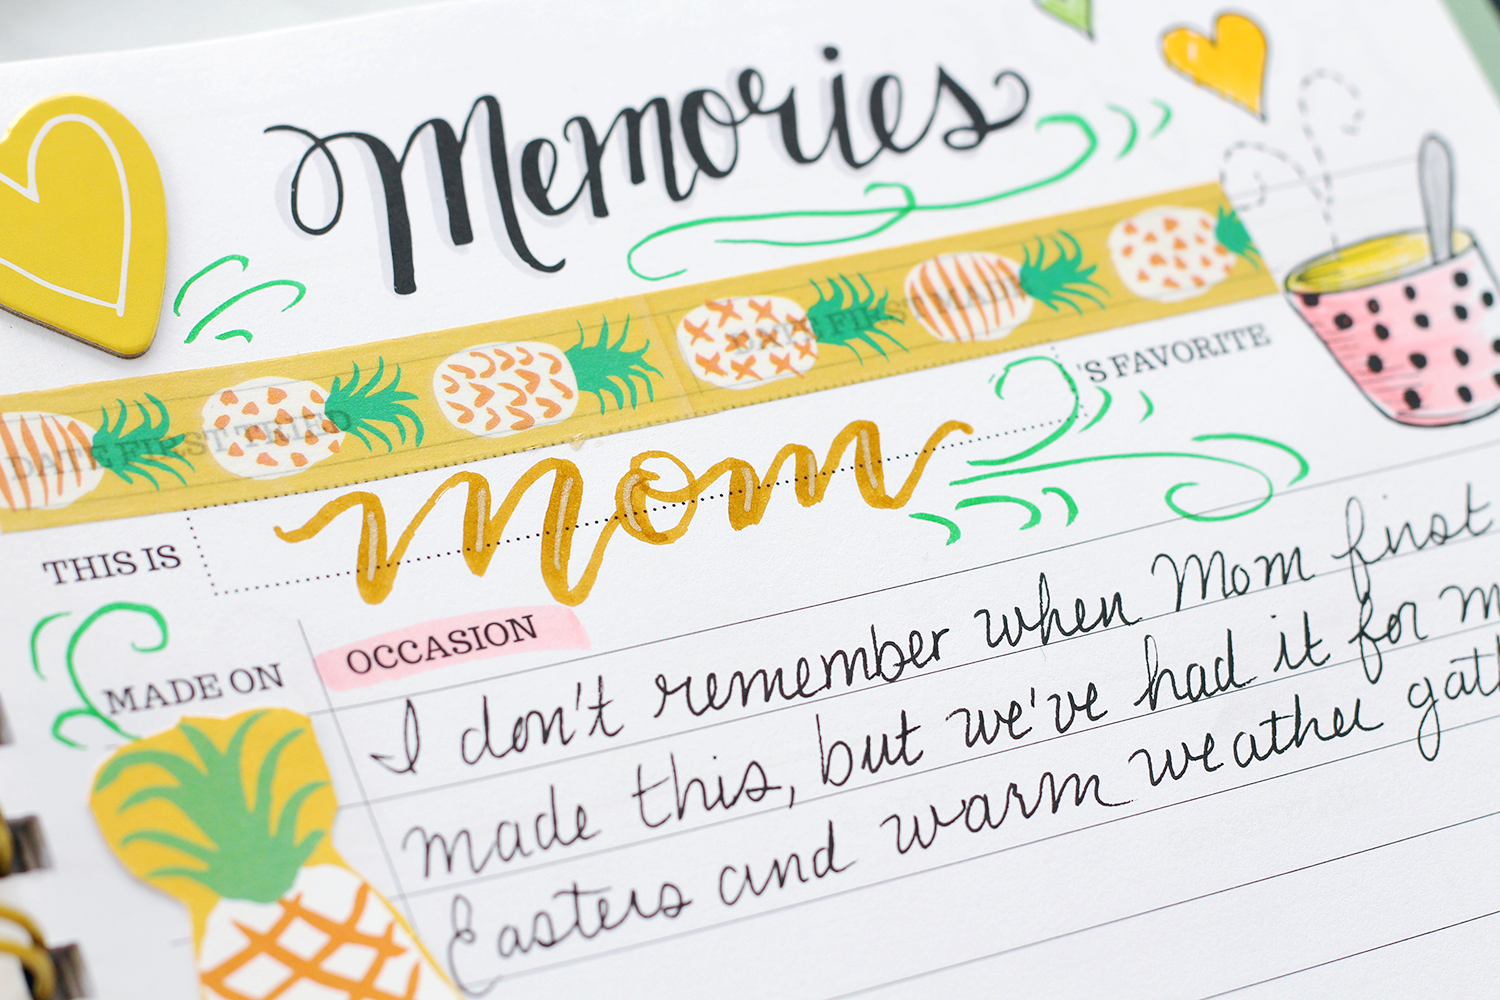 The Keepsake Kitchen Diary is not your average recipe keeper because it combines a journaling memory page for recording special moments and scrapbooking memories